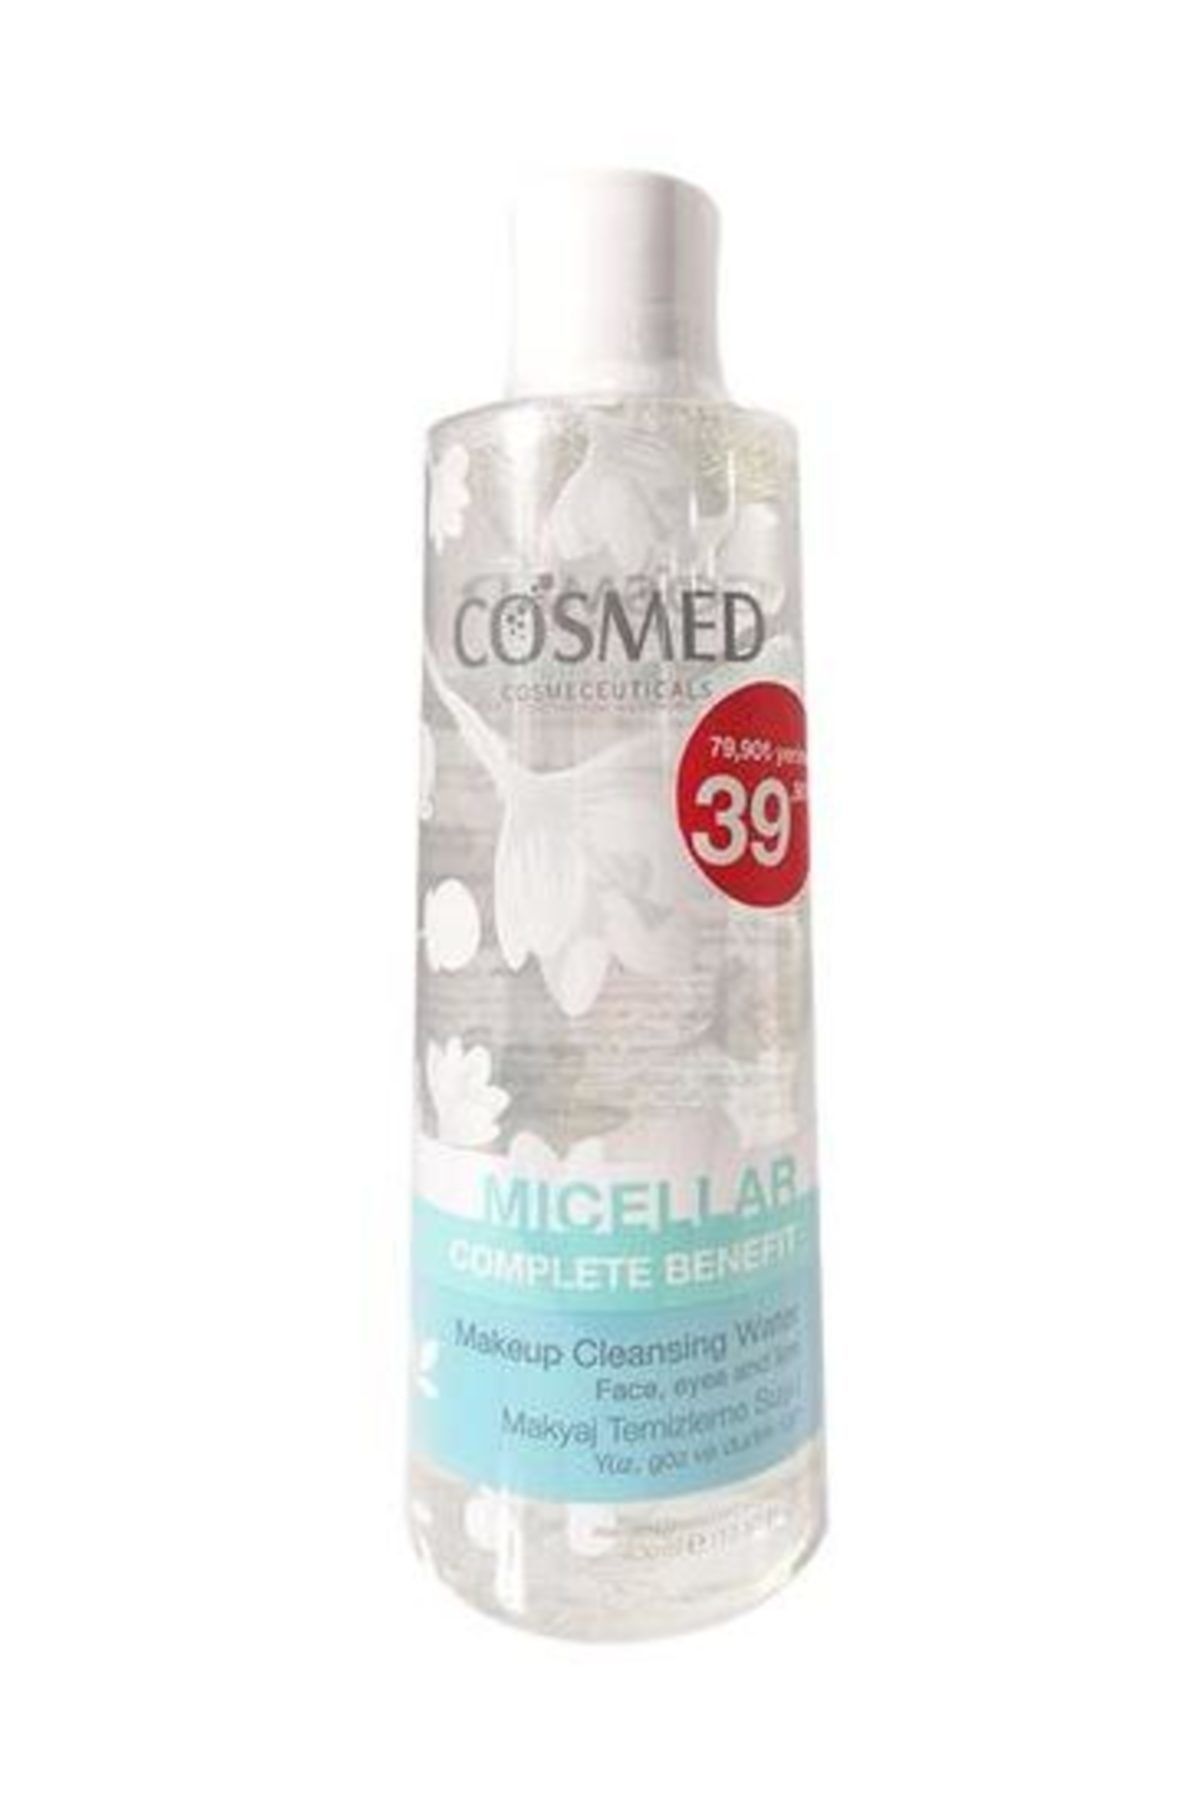 COSMED Complete Benefit Micellar Makeup Cleansing Water 400 ml